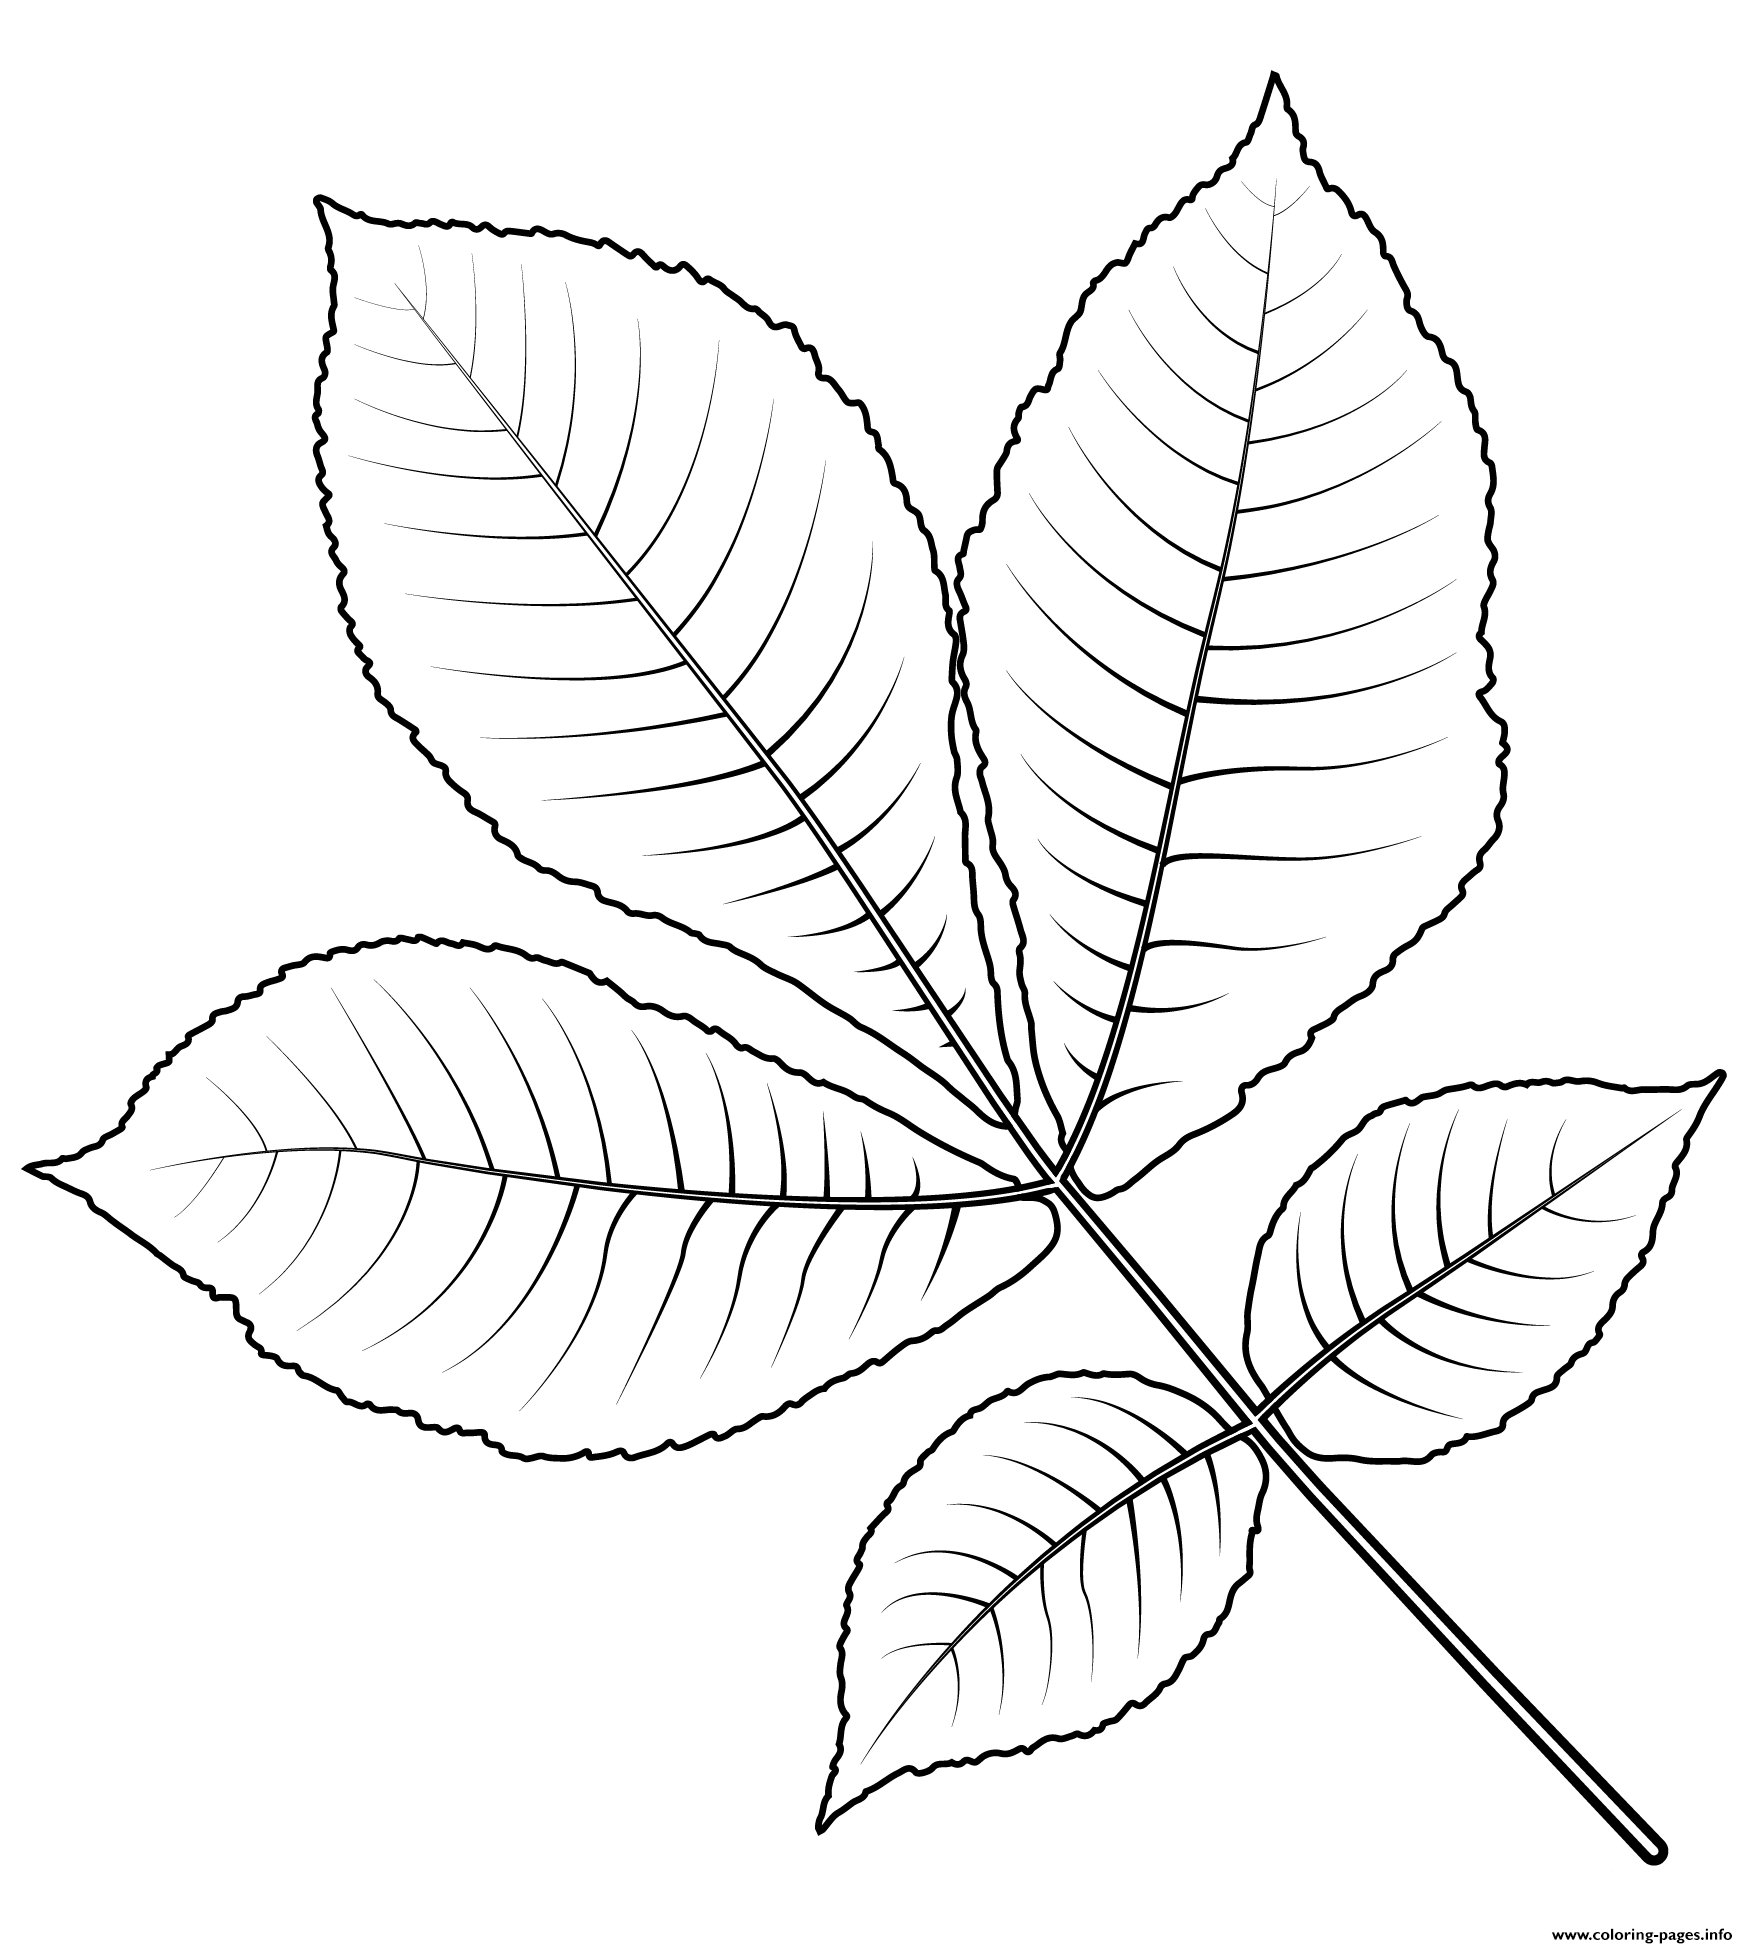 Download Shagbark Hickory Tree Leaf Coloring Pages Printable